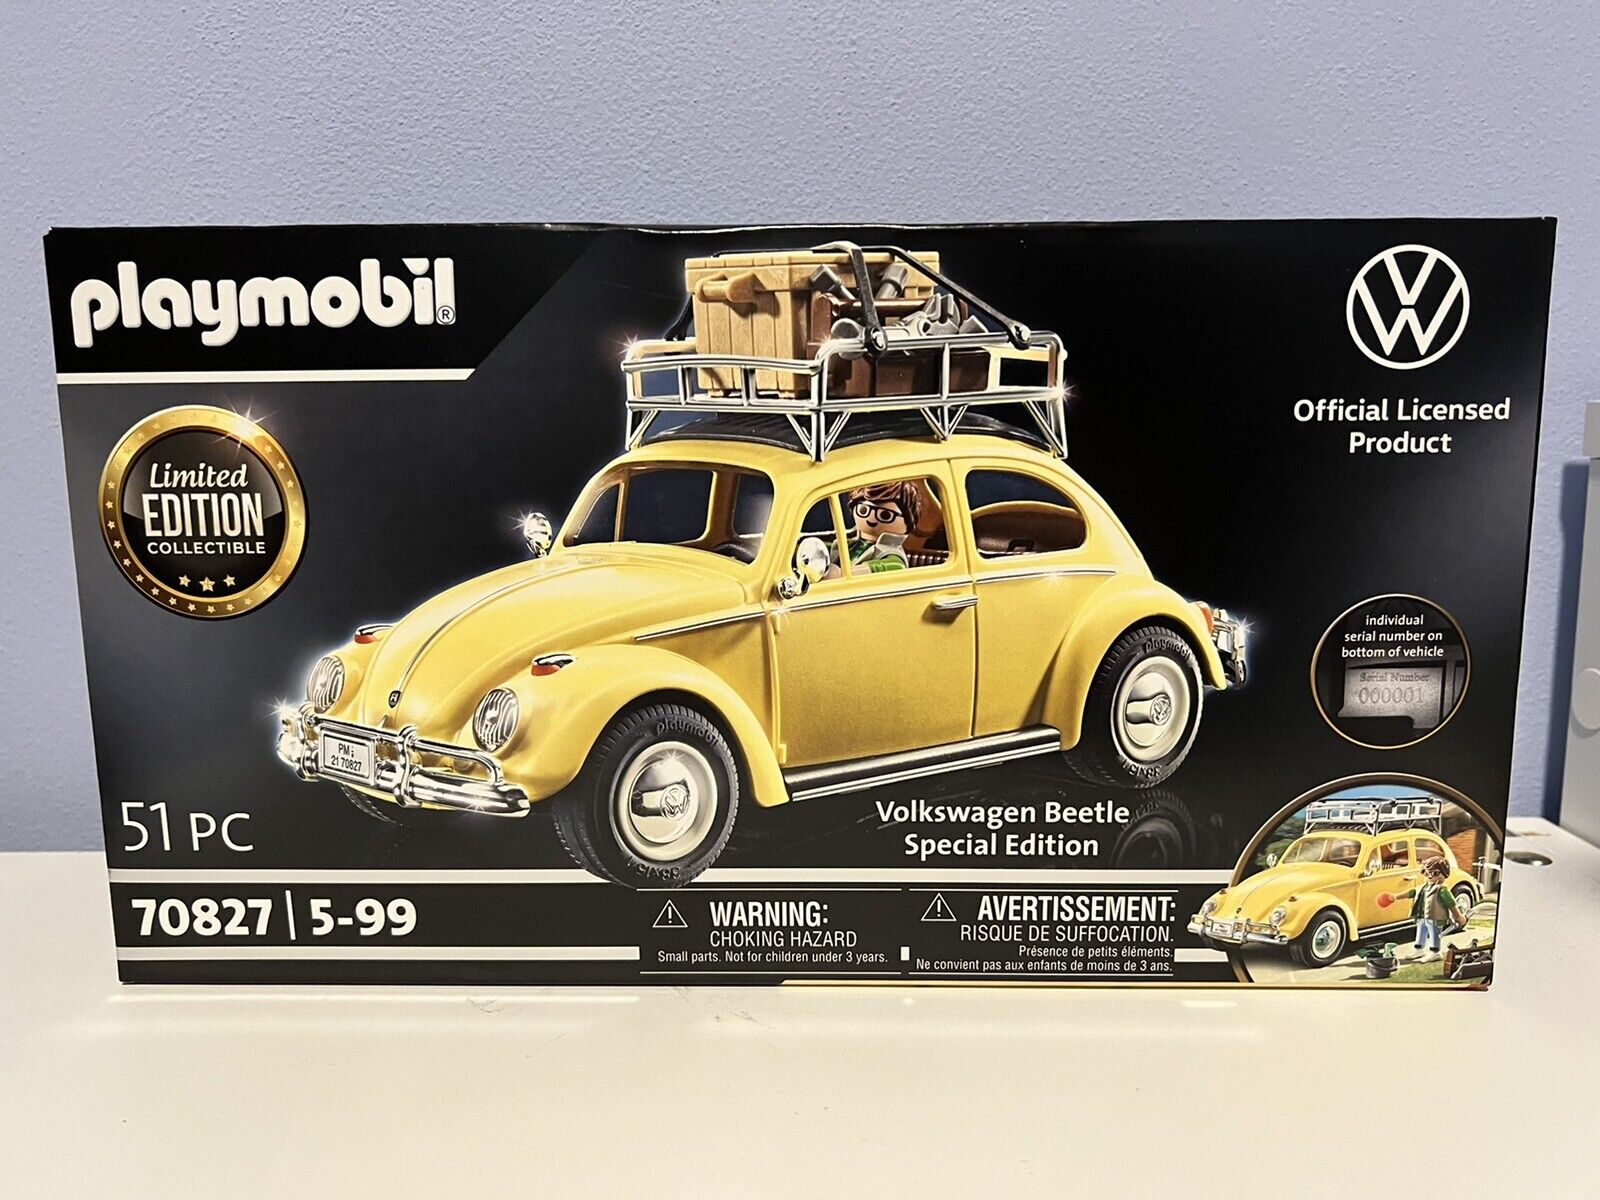 Playmobil-70827-limited-edition-collectible-Volkswagen-Beetle-New-144778984828